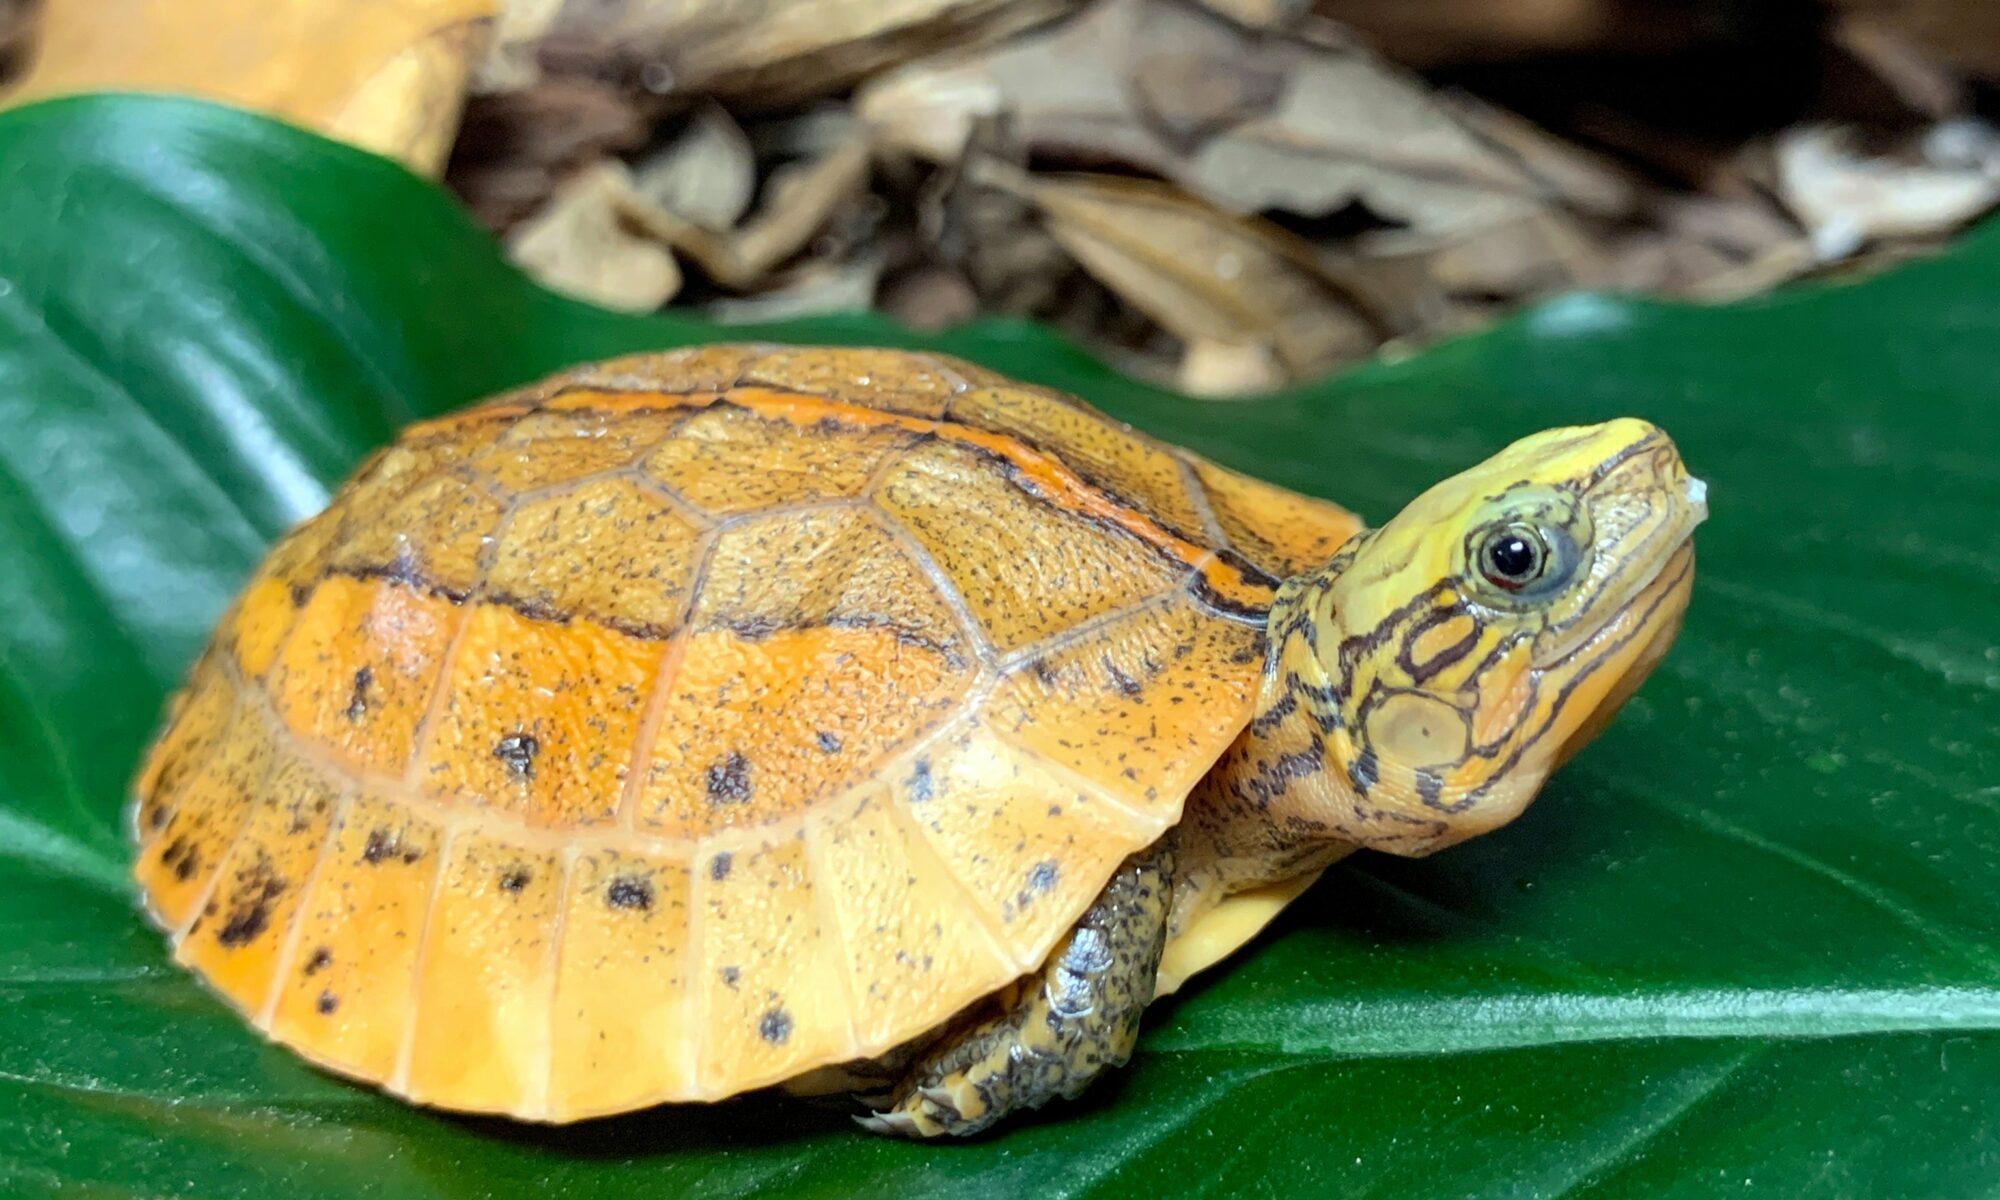 8 [Small Turtles] That Make Great Pets - All Turtles